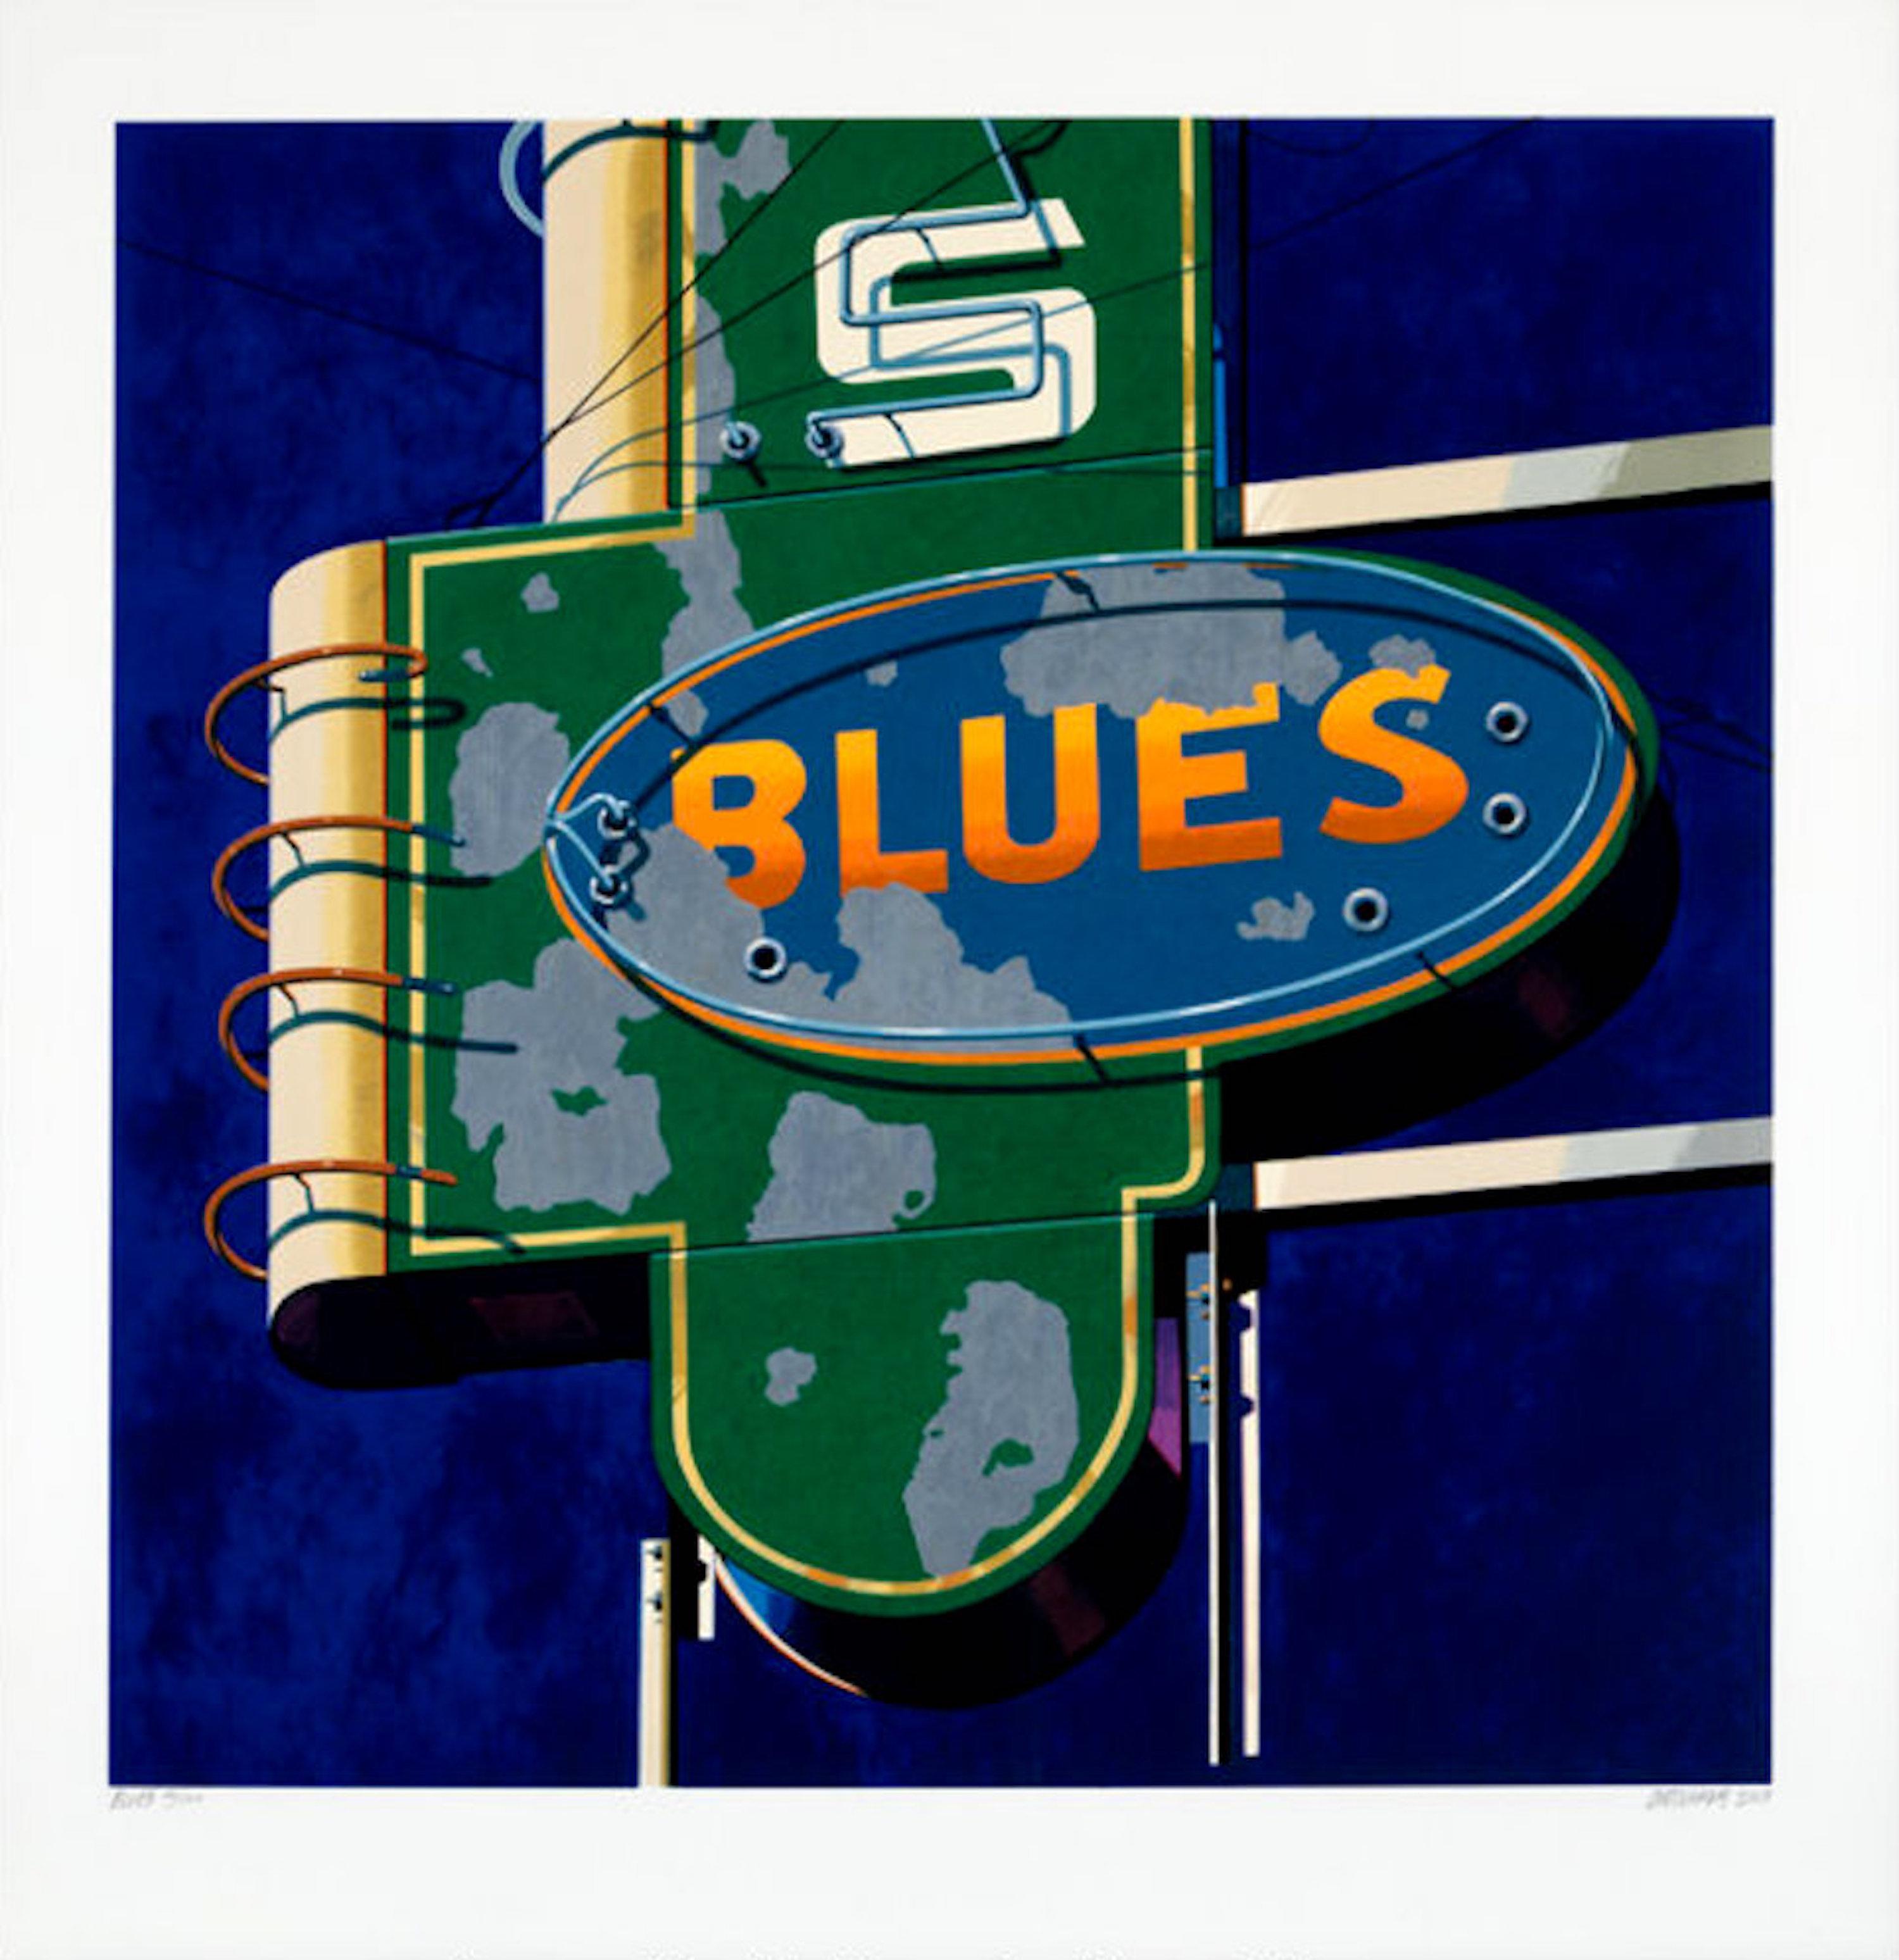 Blues, from the American Signs Portfolio (hand signed by Robert Cottingham)